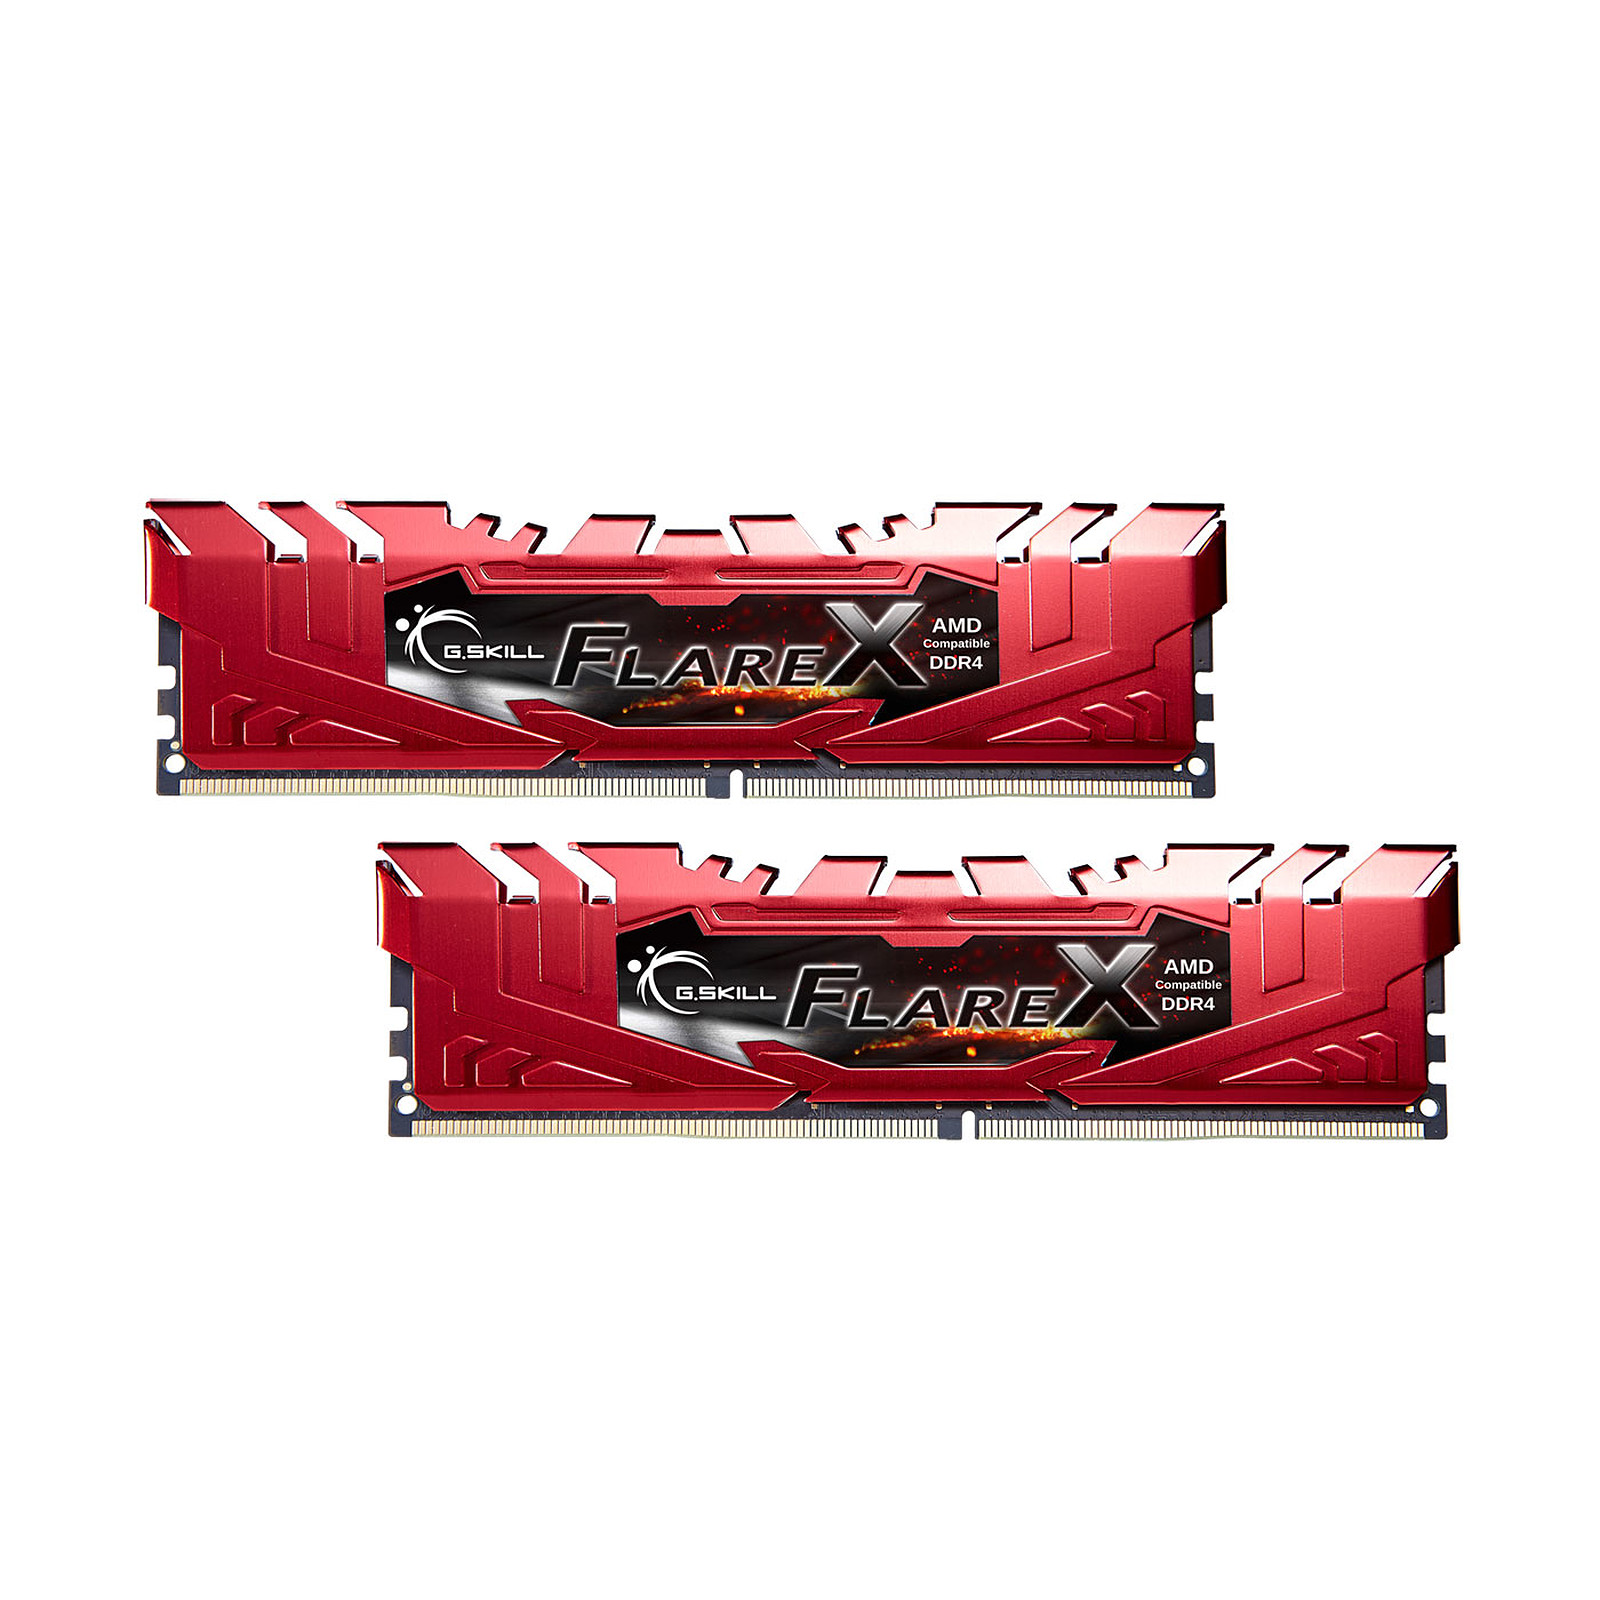 G.Skill Flare X Series Rouge 16 Go (2x 8 Go) DDR4 2400 MHz CL15 - Memoire PC G.Skill